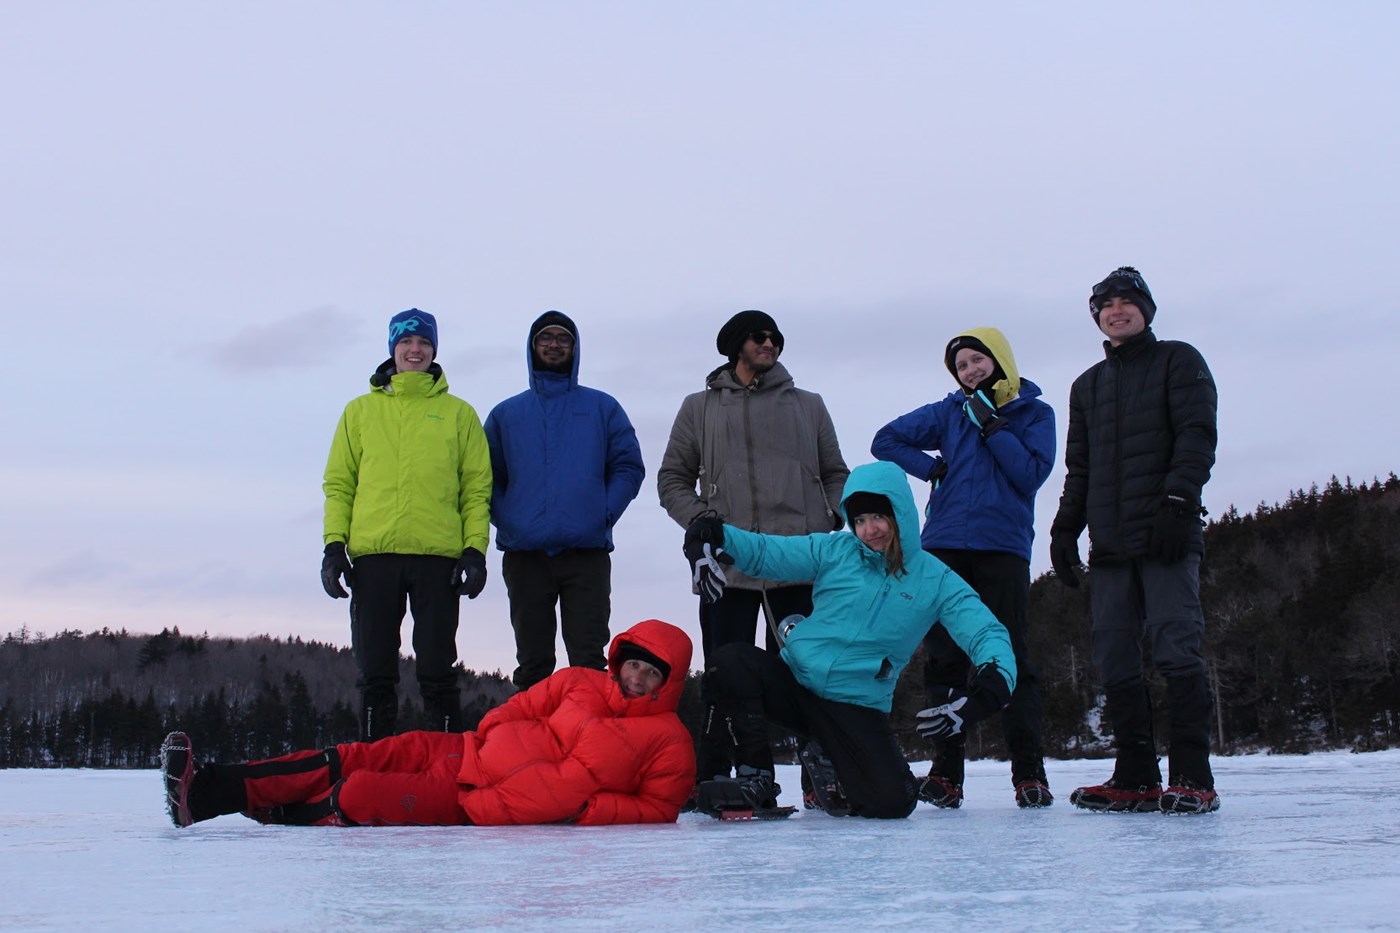 Winter hikers making silly poses on a frozen lake.